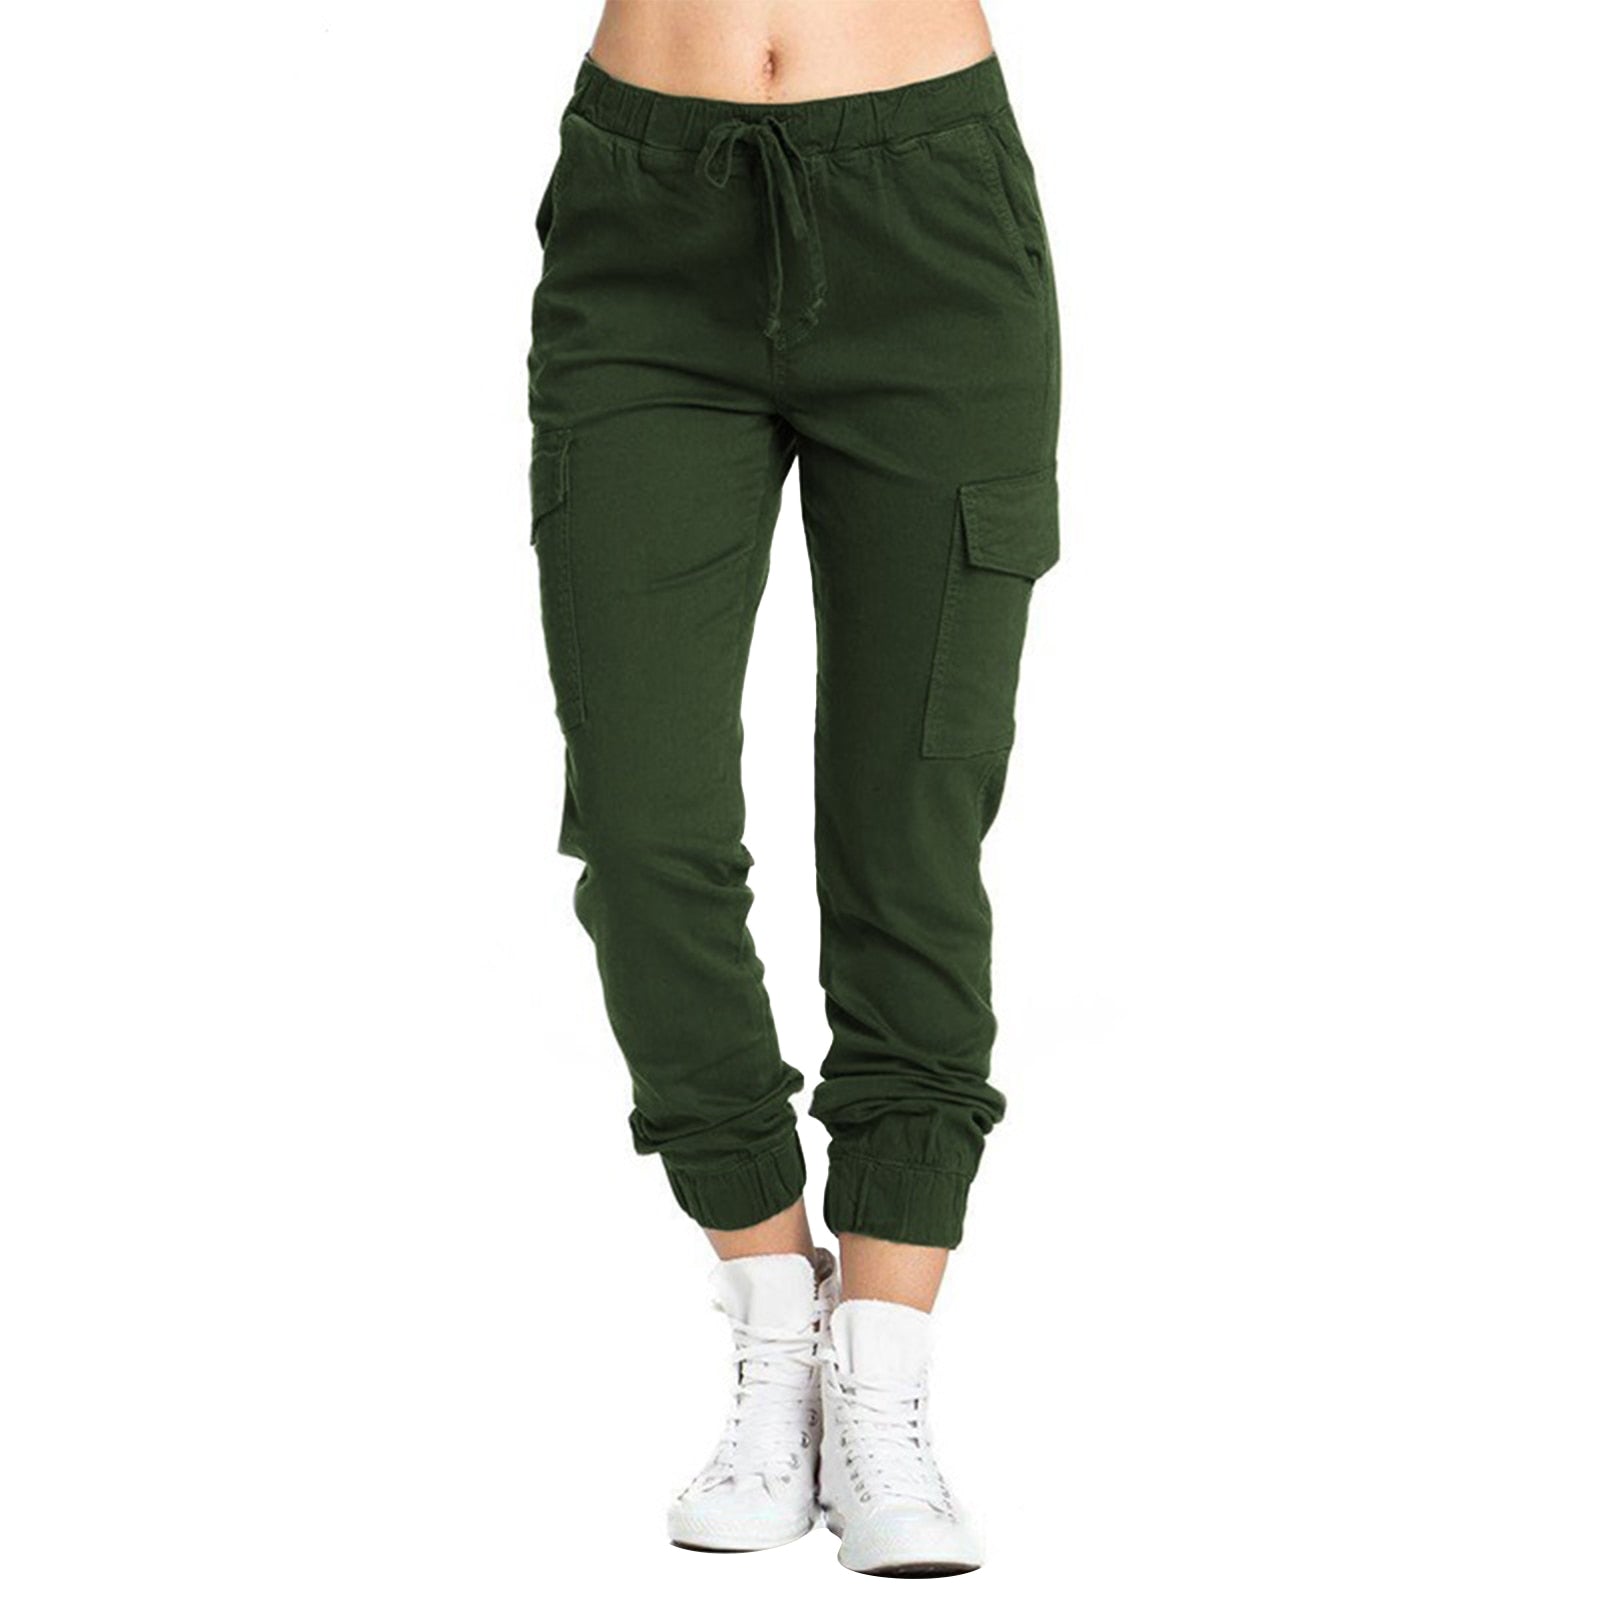 Cinessd  Women Solid Cargo Pants Multicolor Stretch Casual Lacing Drawstring High Waist Bottoms Trousers Fitness Tracksuit  High Hop Pant